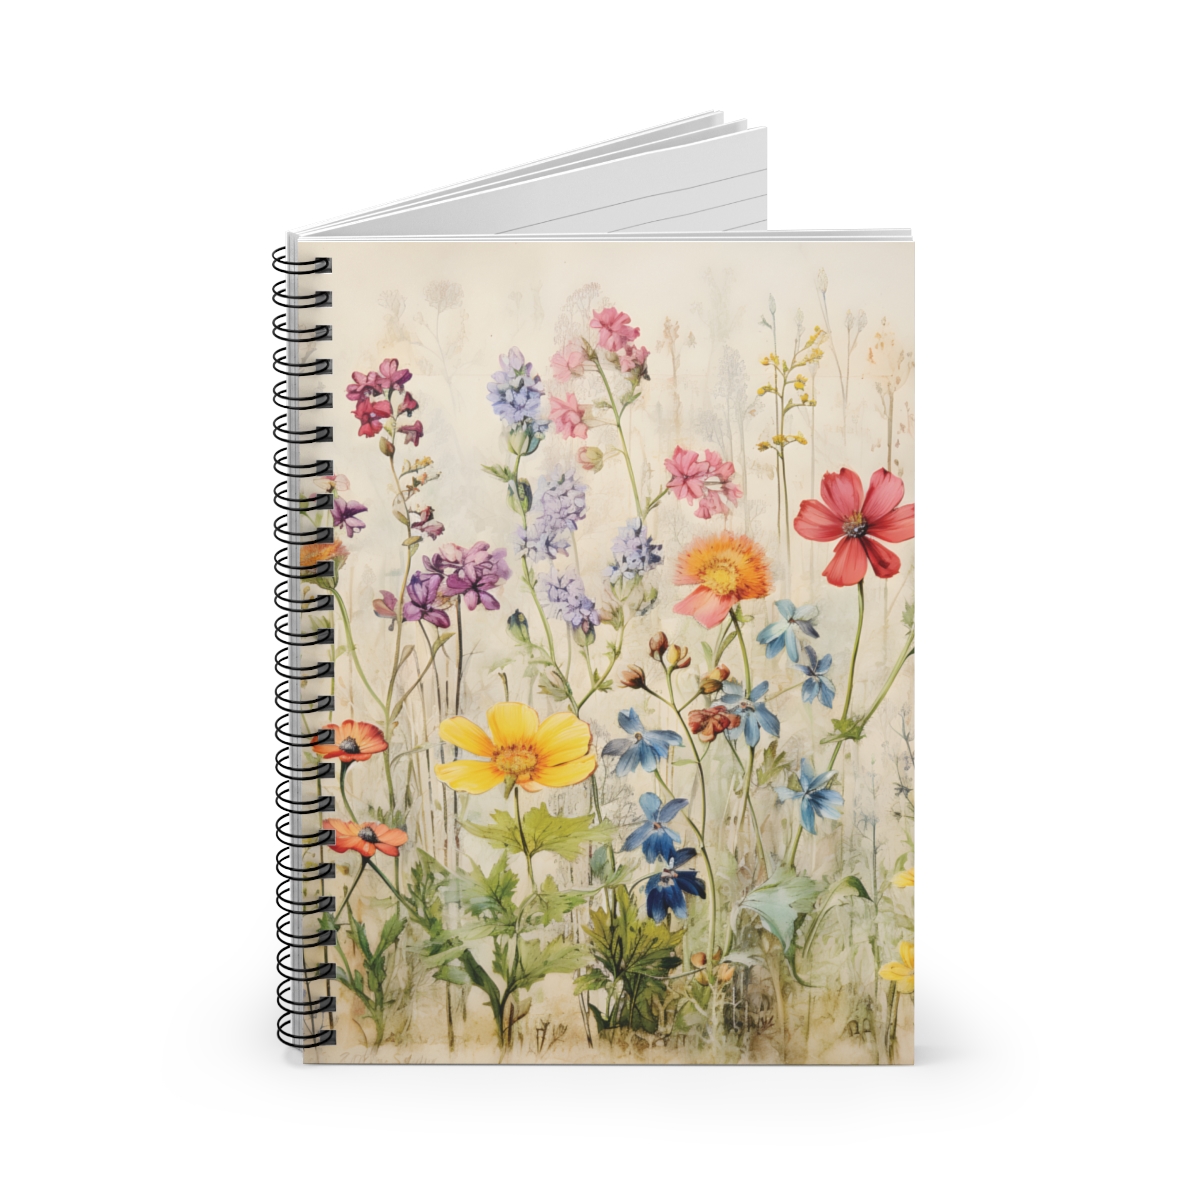 a wildflower spiral notebook open part ways to show some lined paper